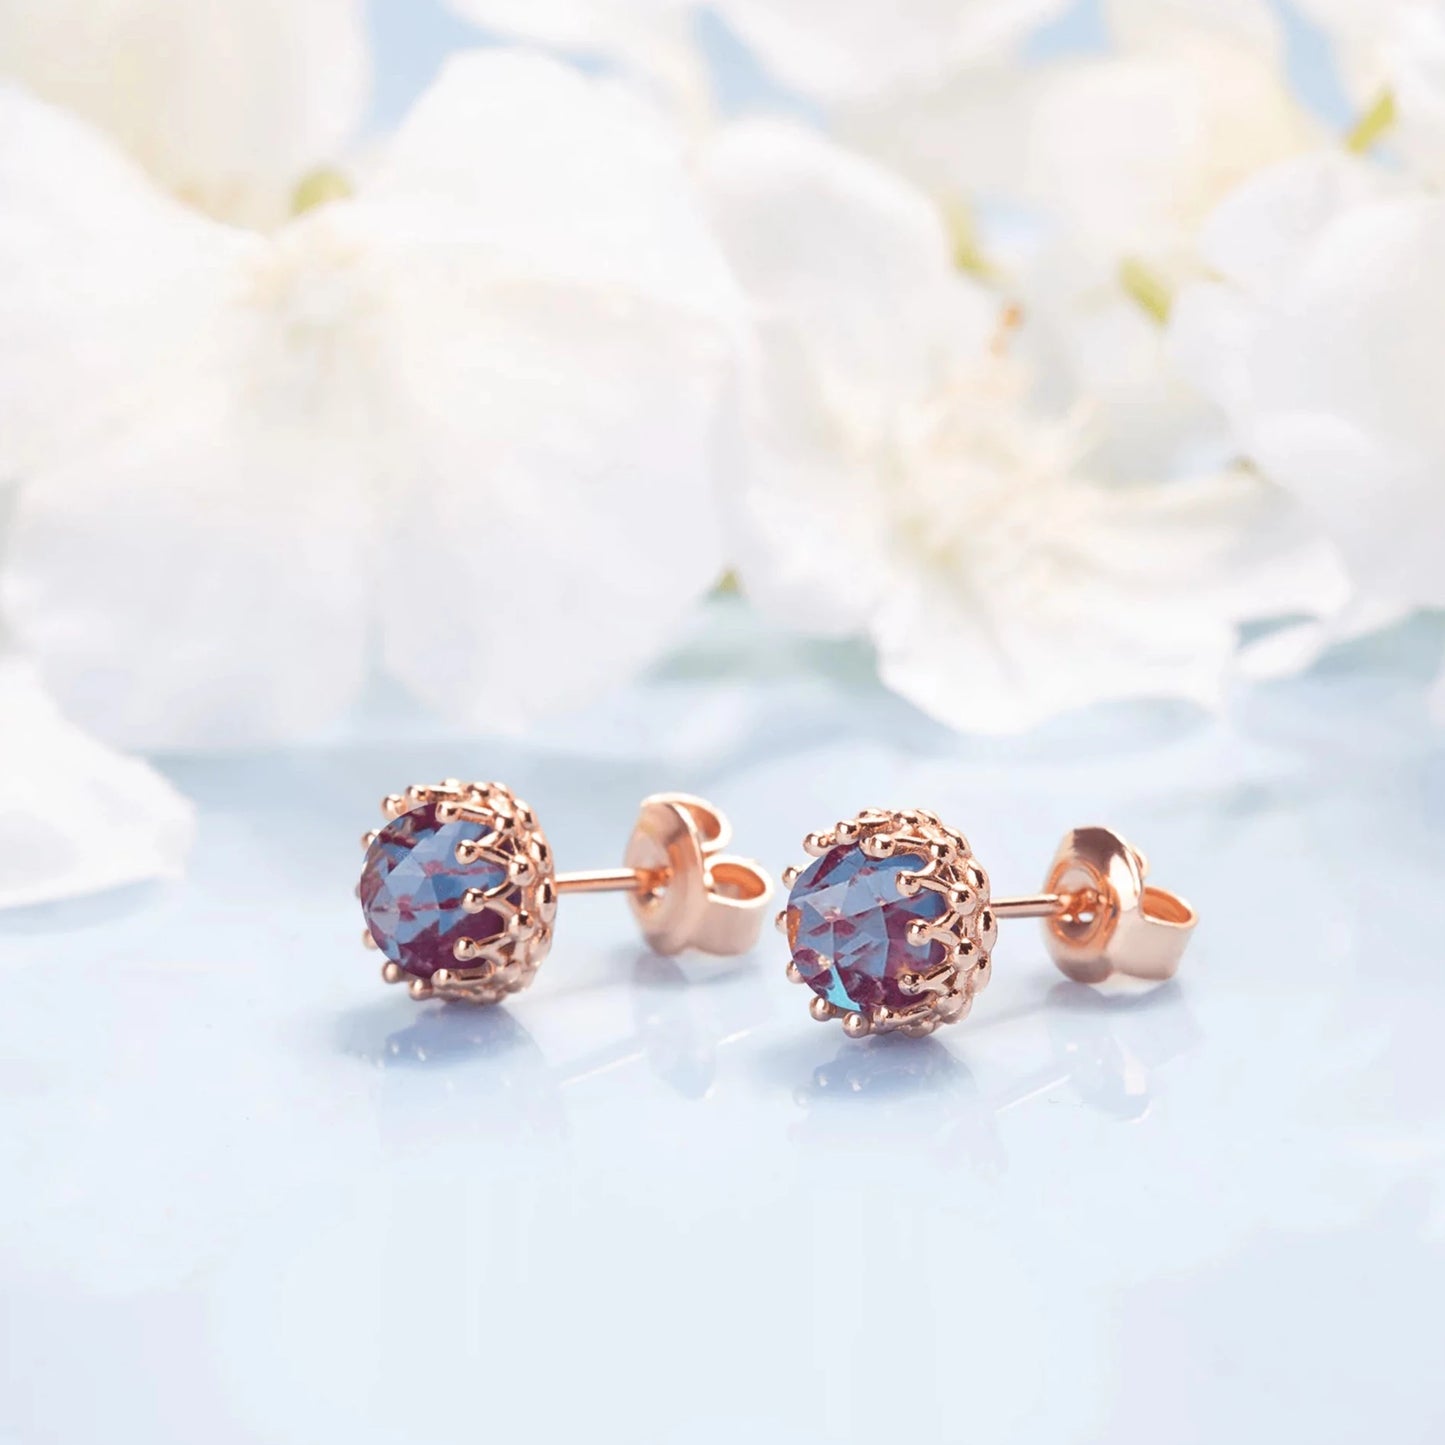 Alexandrite Crown Studs in color rose gold